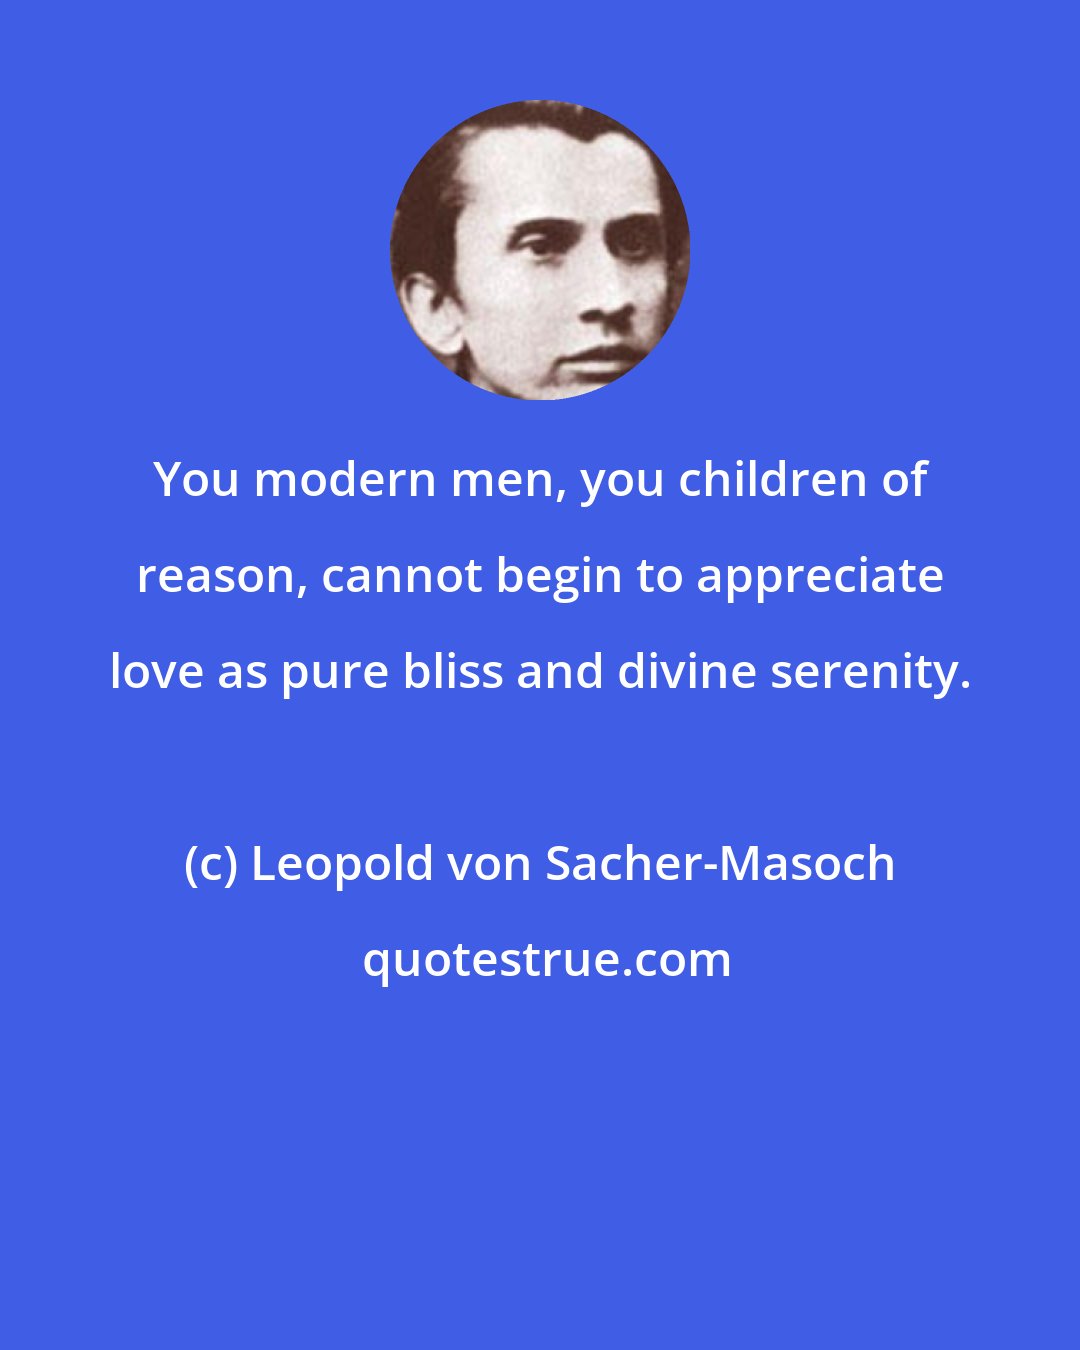 Leopold von Sacher-Masoch: You modern men, you children of reason, cannot begin to appreciate love as pure bliss and divine serenity.